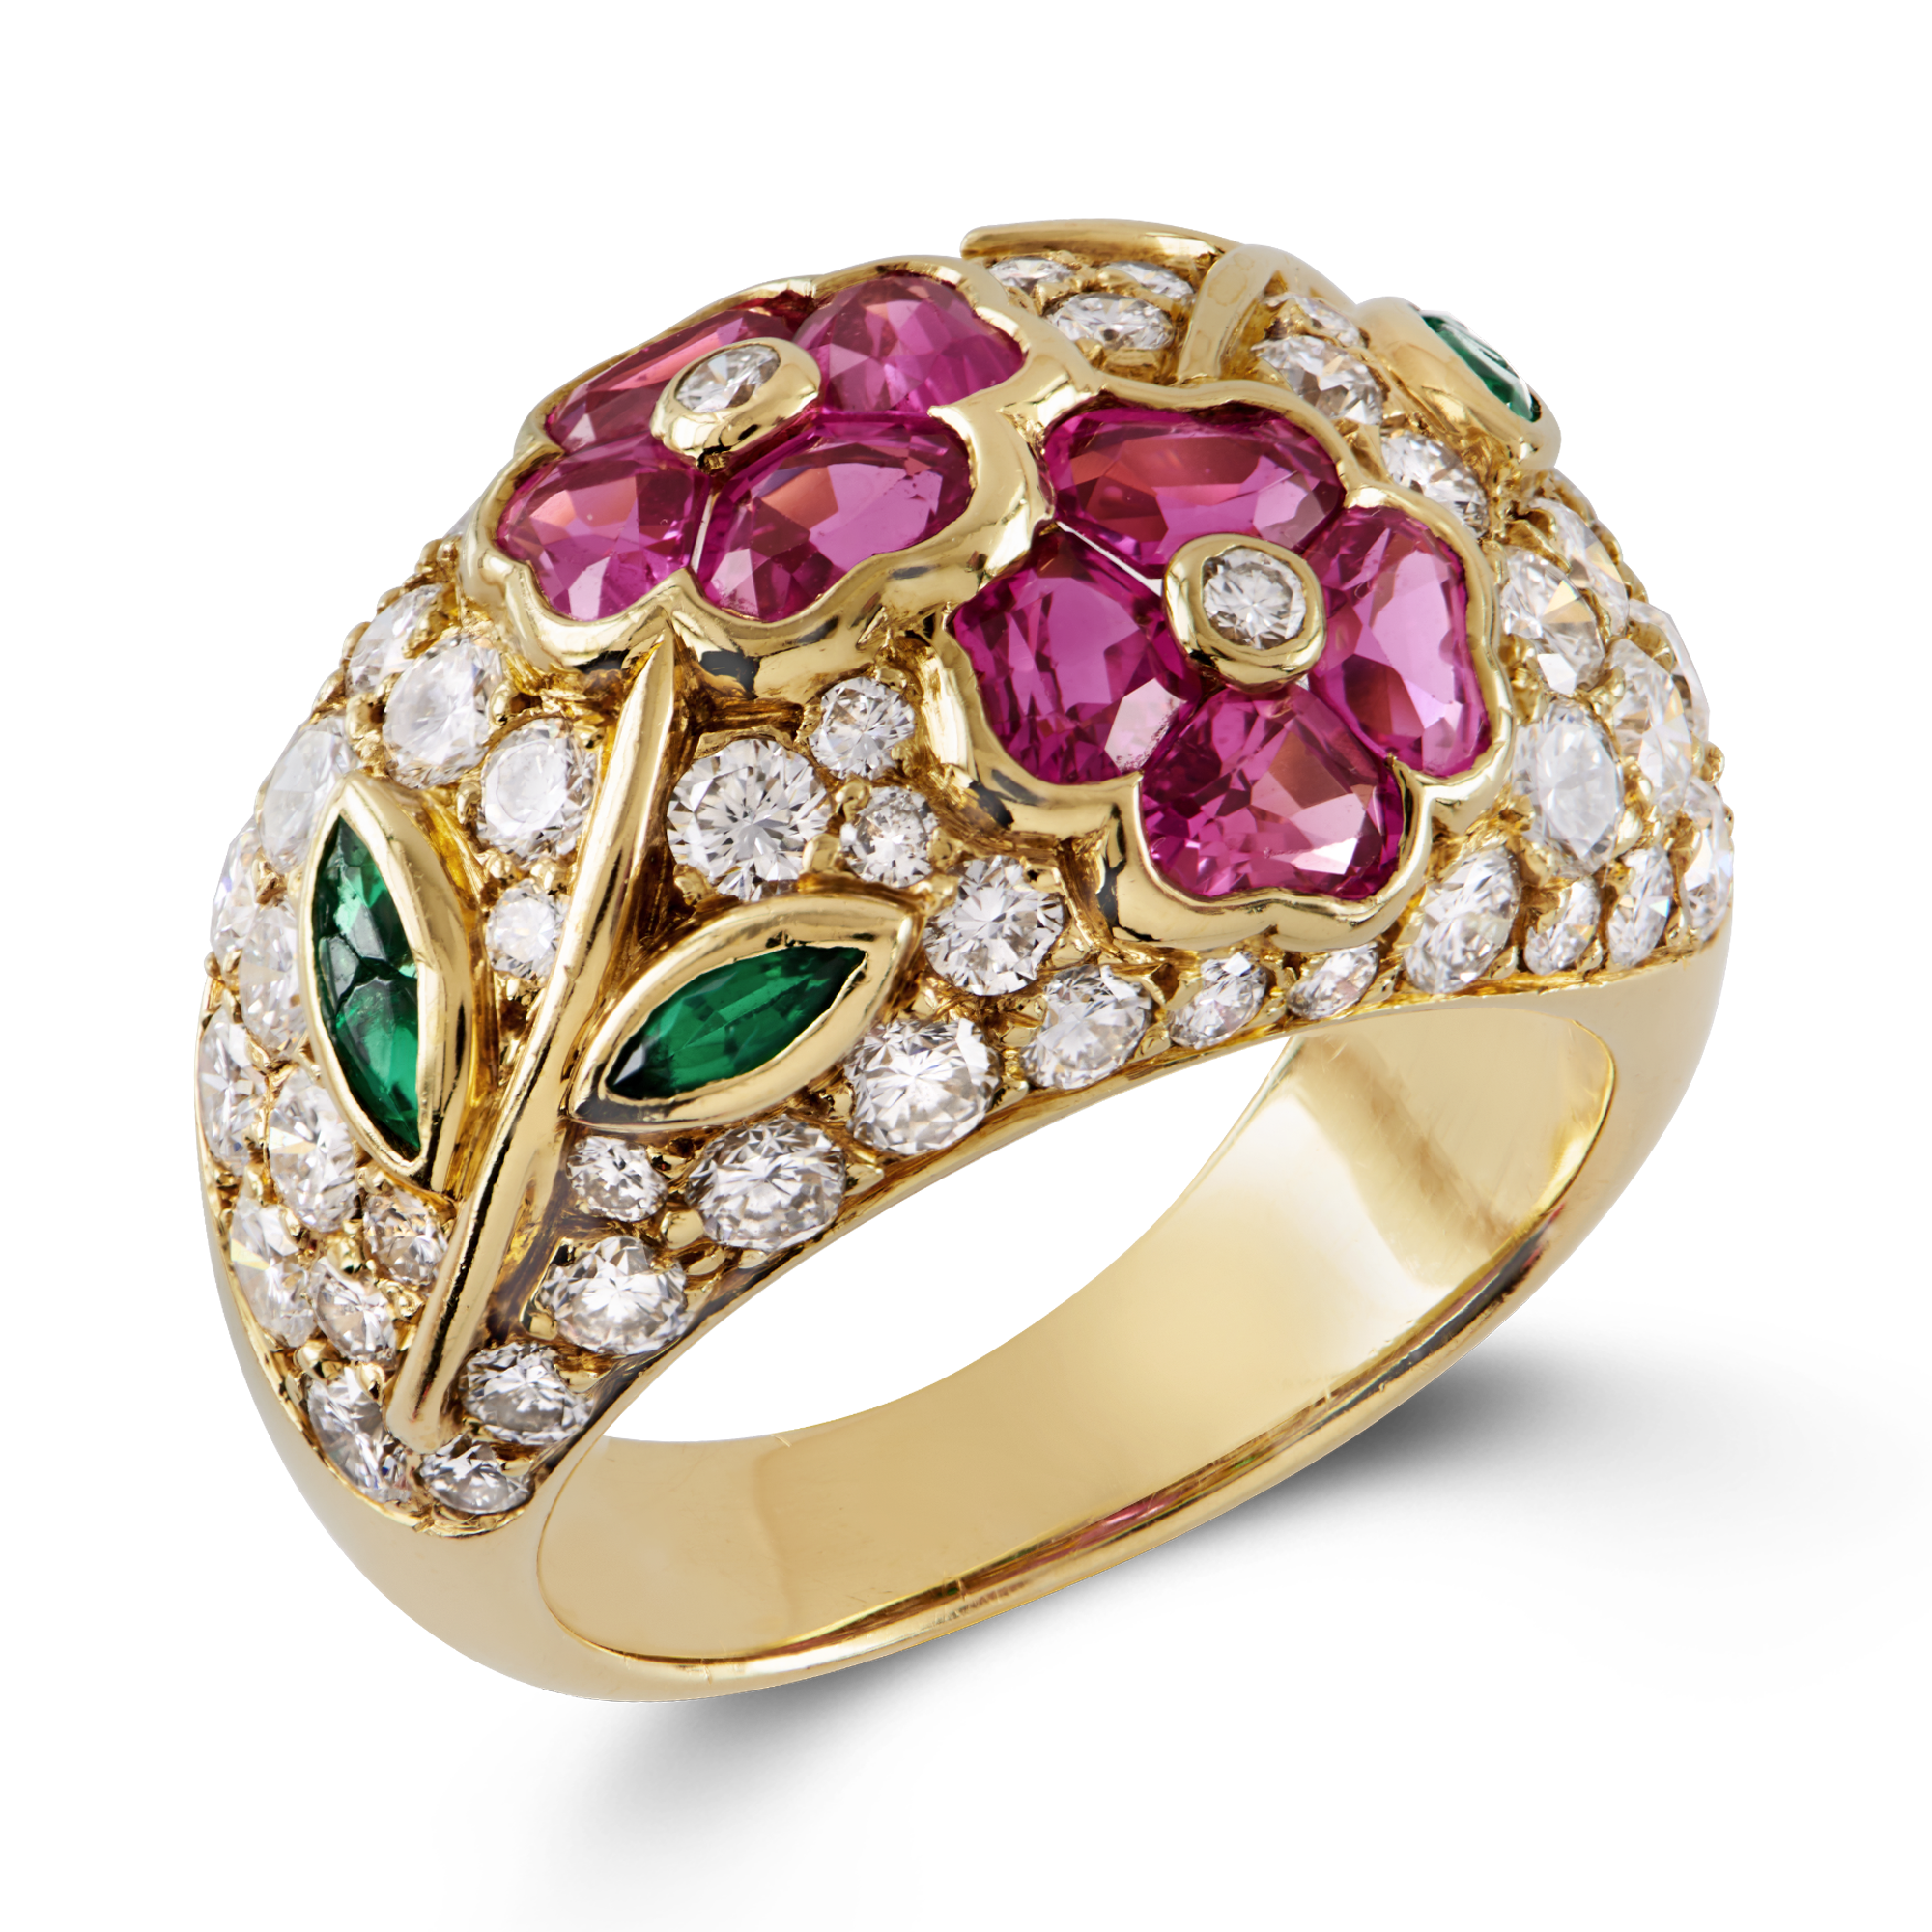 Contemporary Van Cleef & Arpels Floral Ring Cocktail Ring, with Diamond, Pink Sapphire & Emerald_1